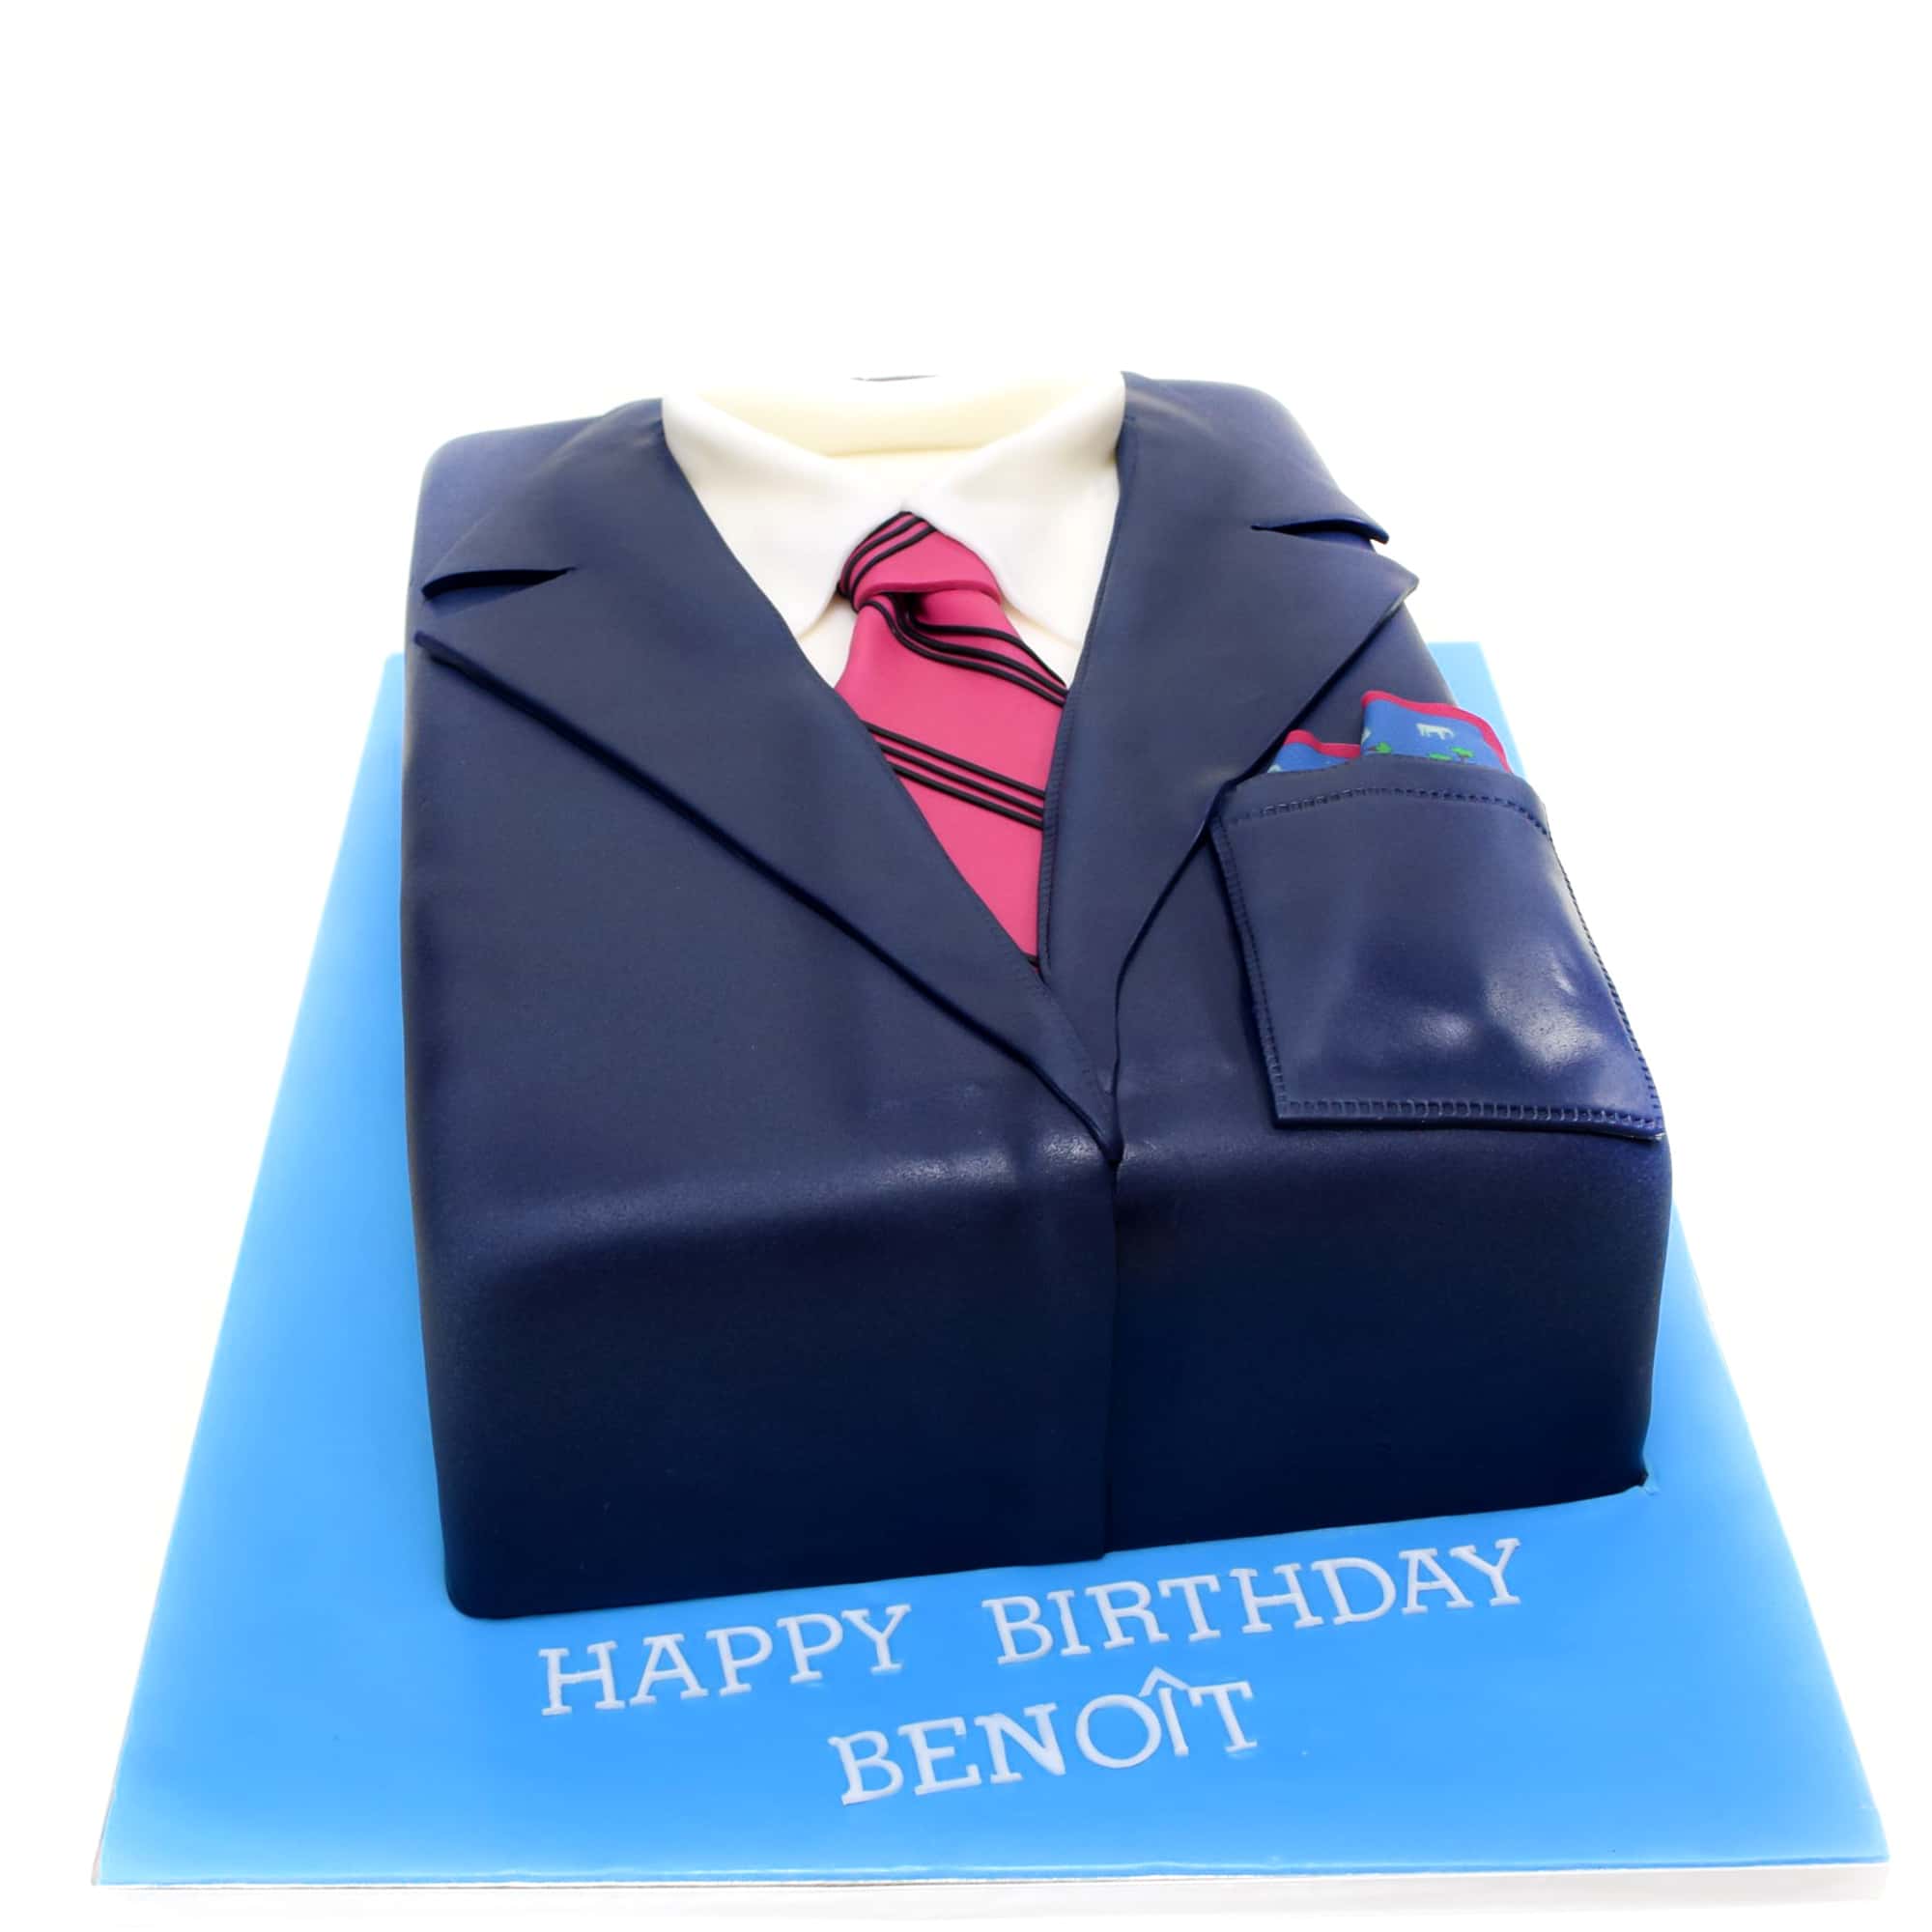 Suit Cake - CakeCentral.com